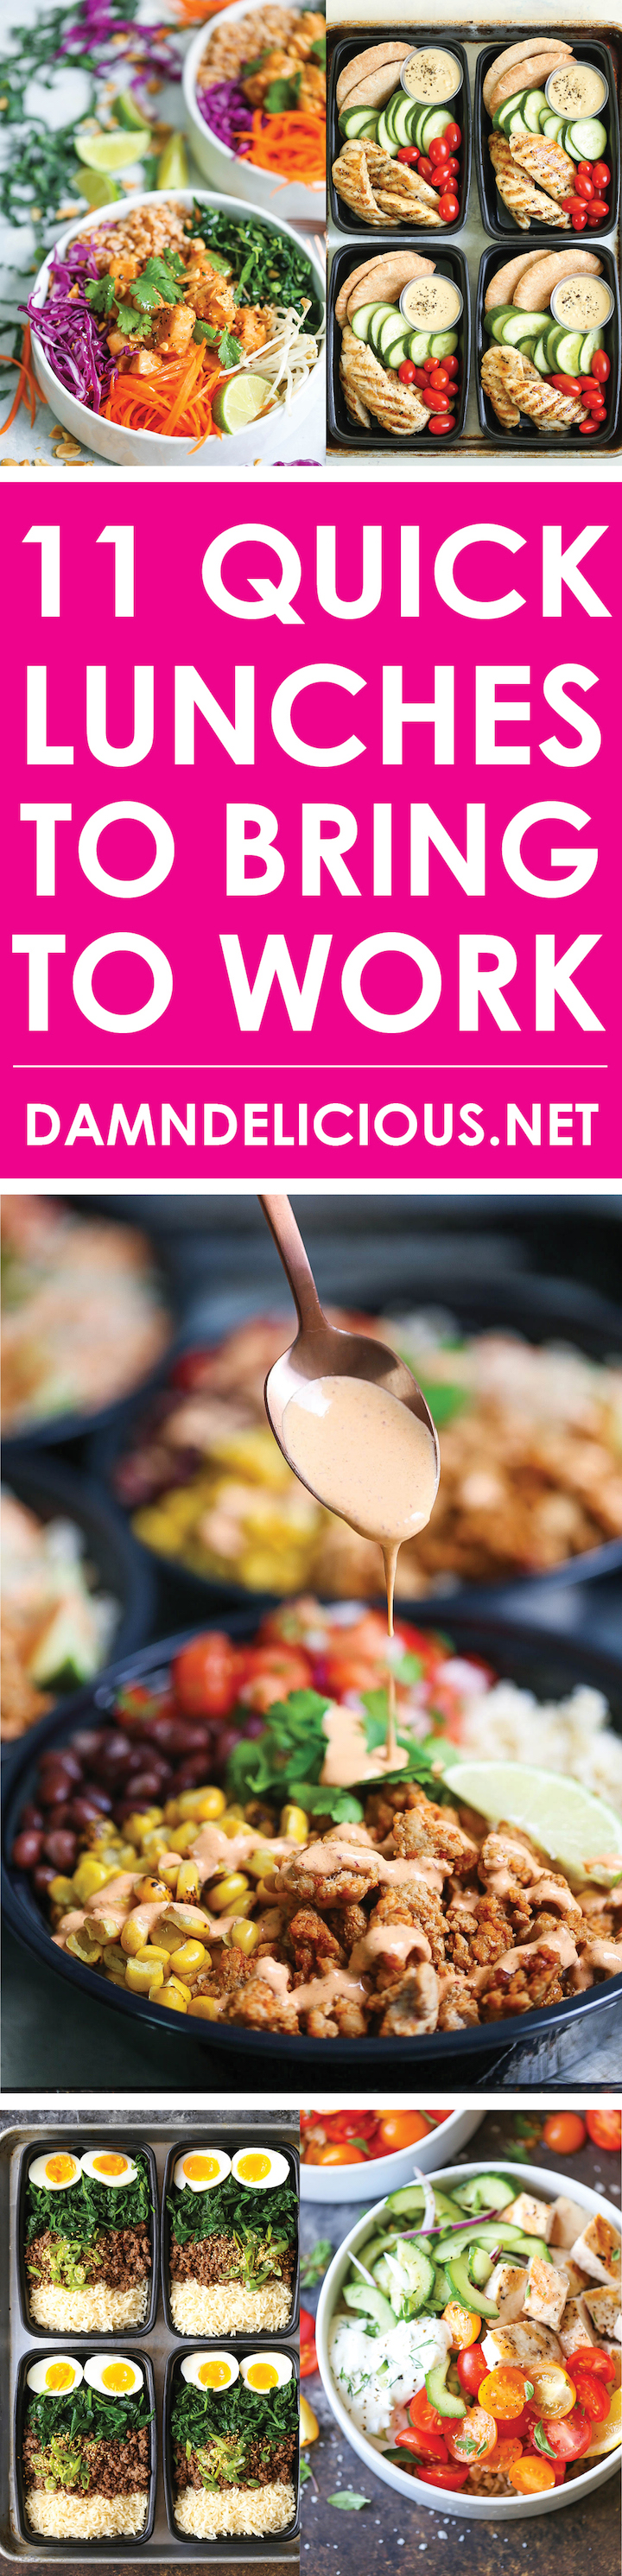 10 Easy Lunch Ideas for Work